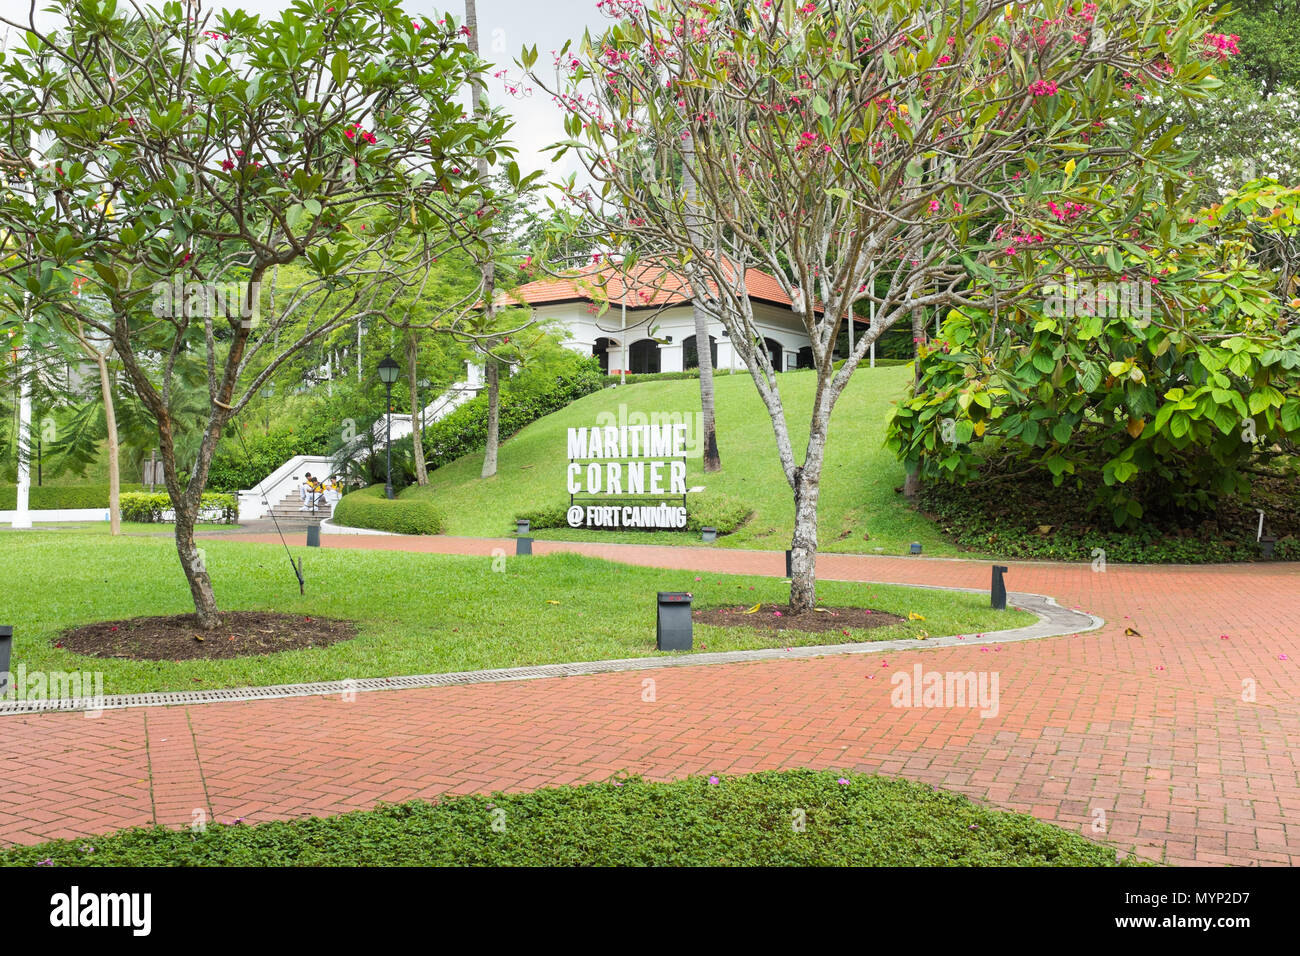 Maritime Ecke am Fort Canning Park in Singapur Stockfoto